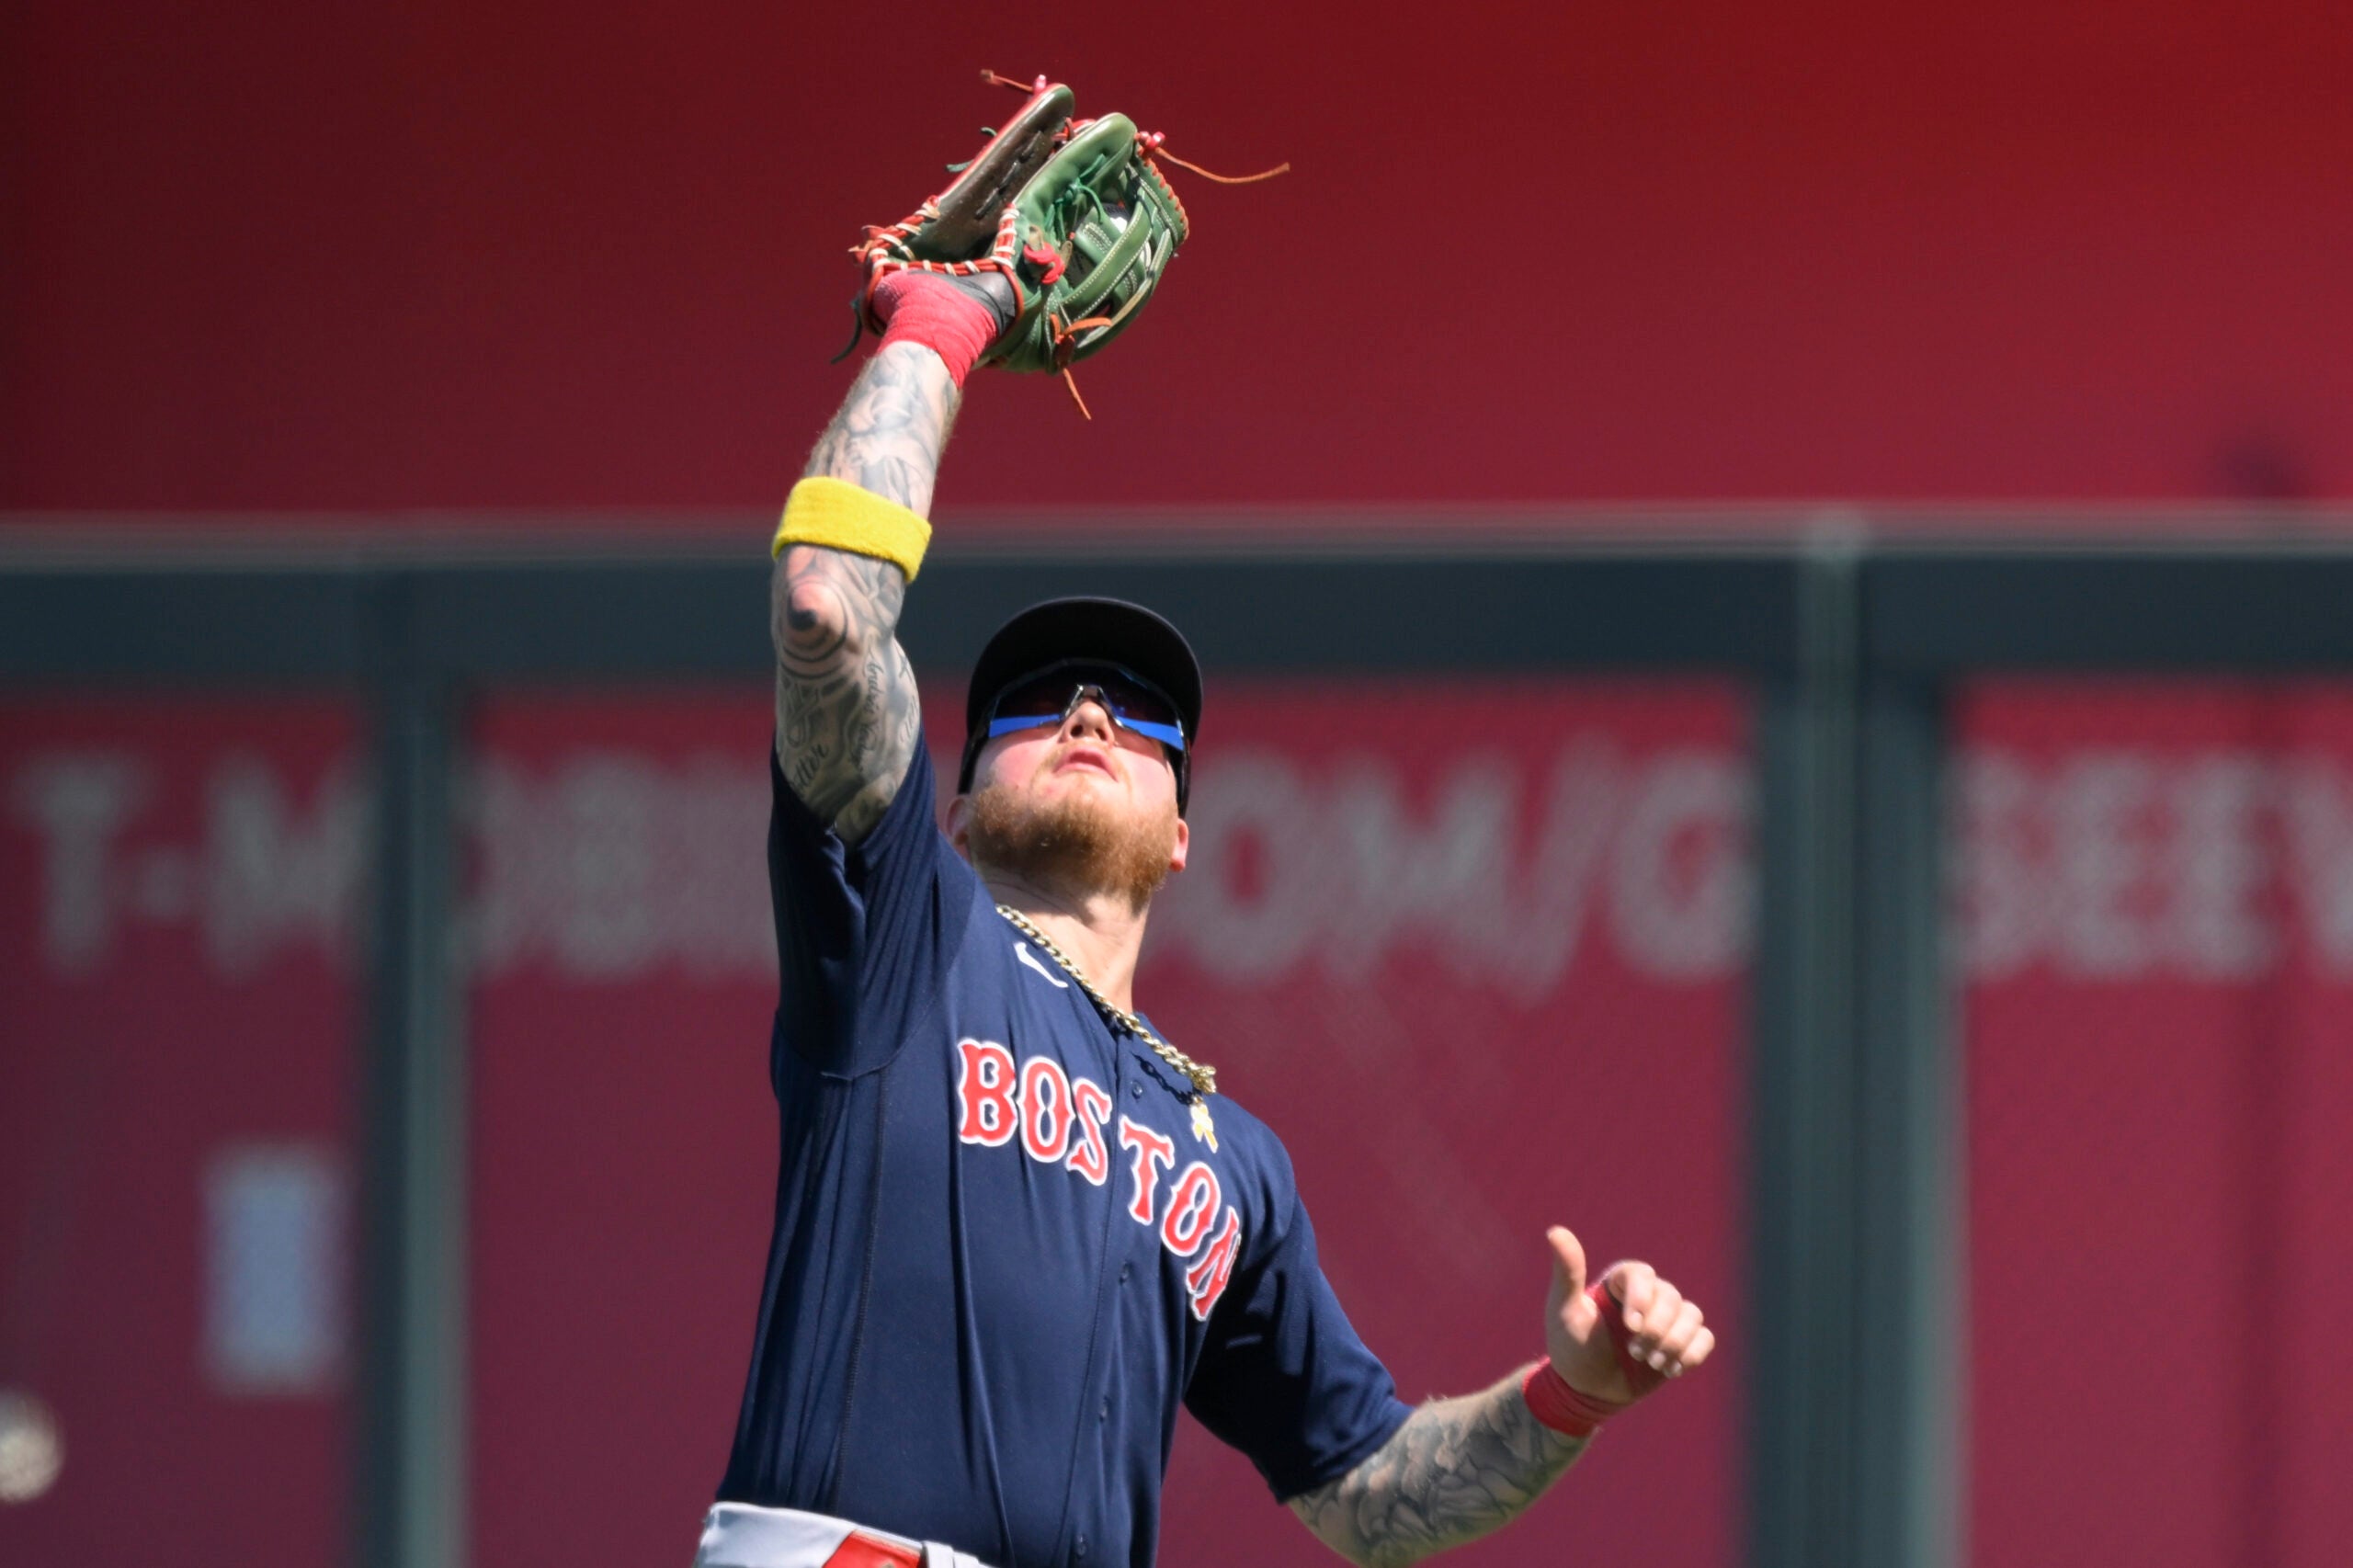 Alex Verdugo 'not thinking' about replacing Mookie Betts with Boston Red Sox:  'I don't care about shoes to fill' 